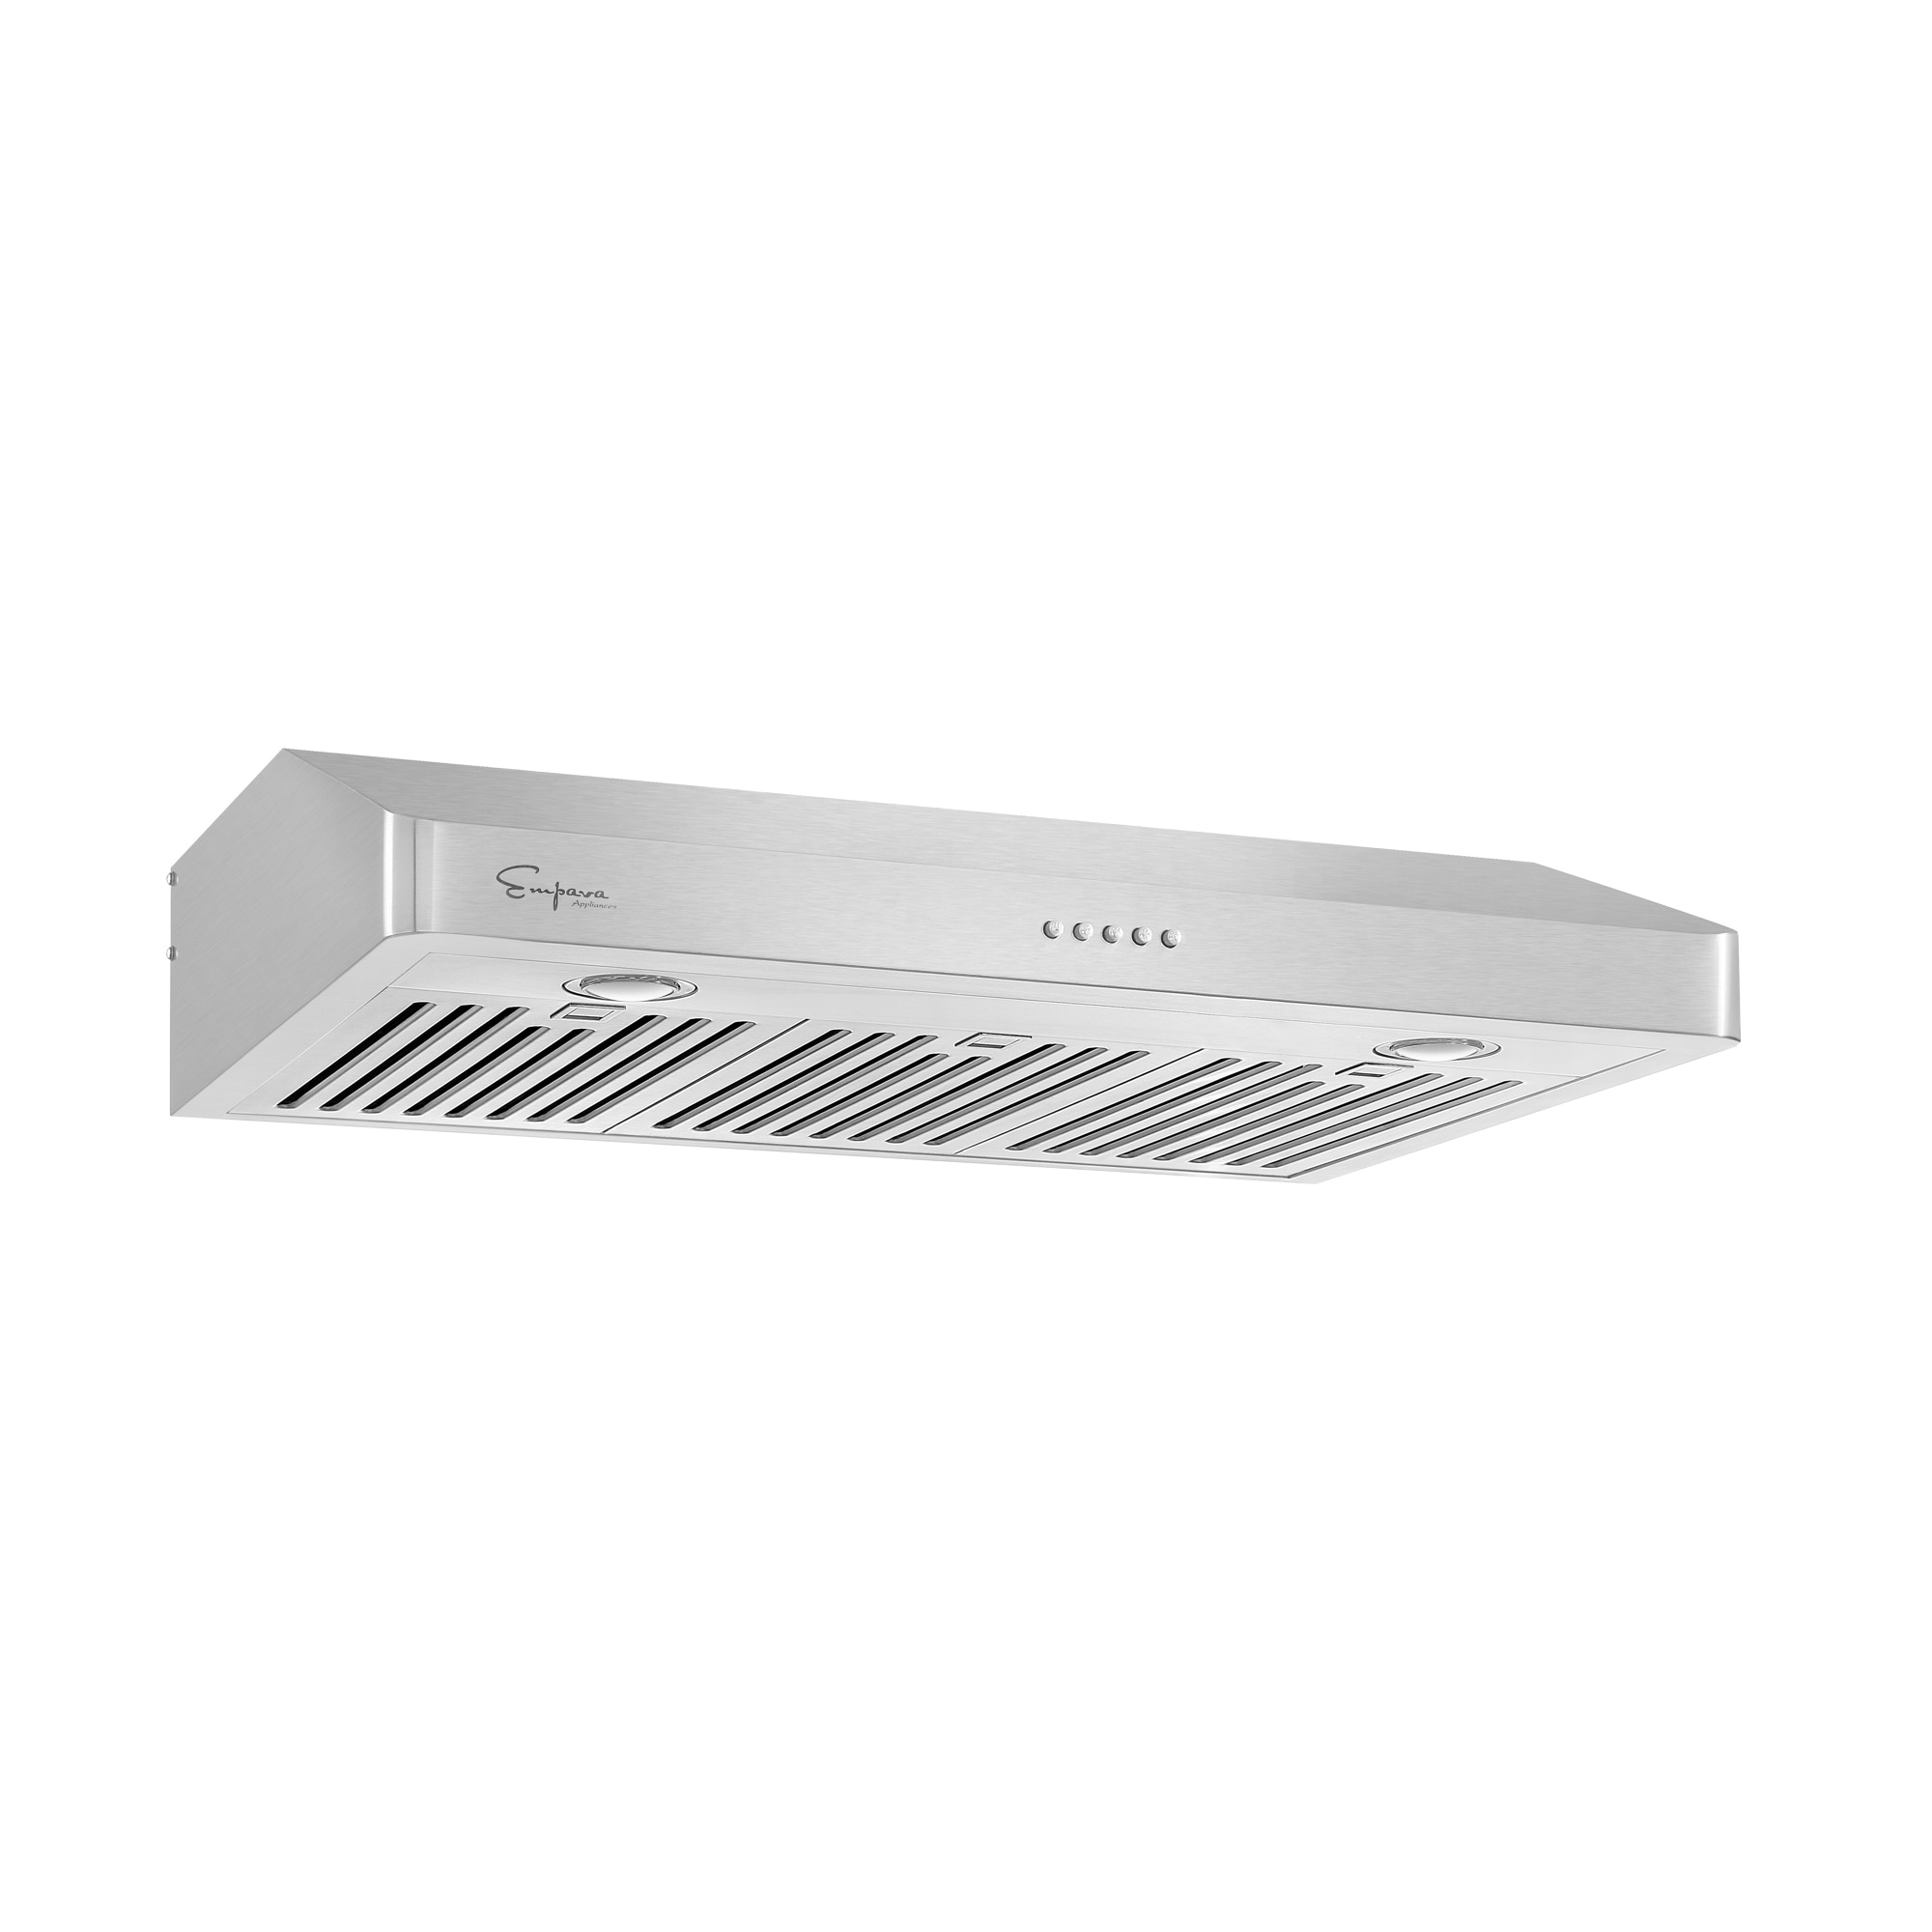 Empava 36-in 500-CFM Ducted Stainless Steel Under Cabinet Range Hoods  Undercabinet Mount in the Undercabinet Range Hoods department at